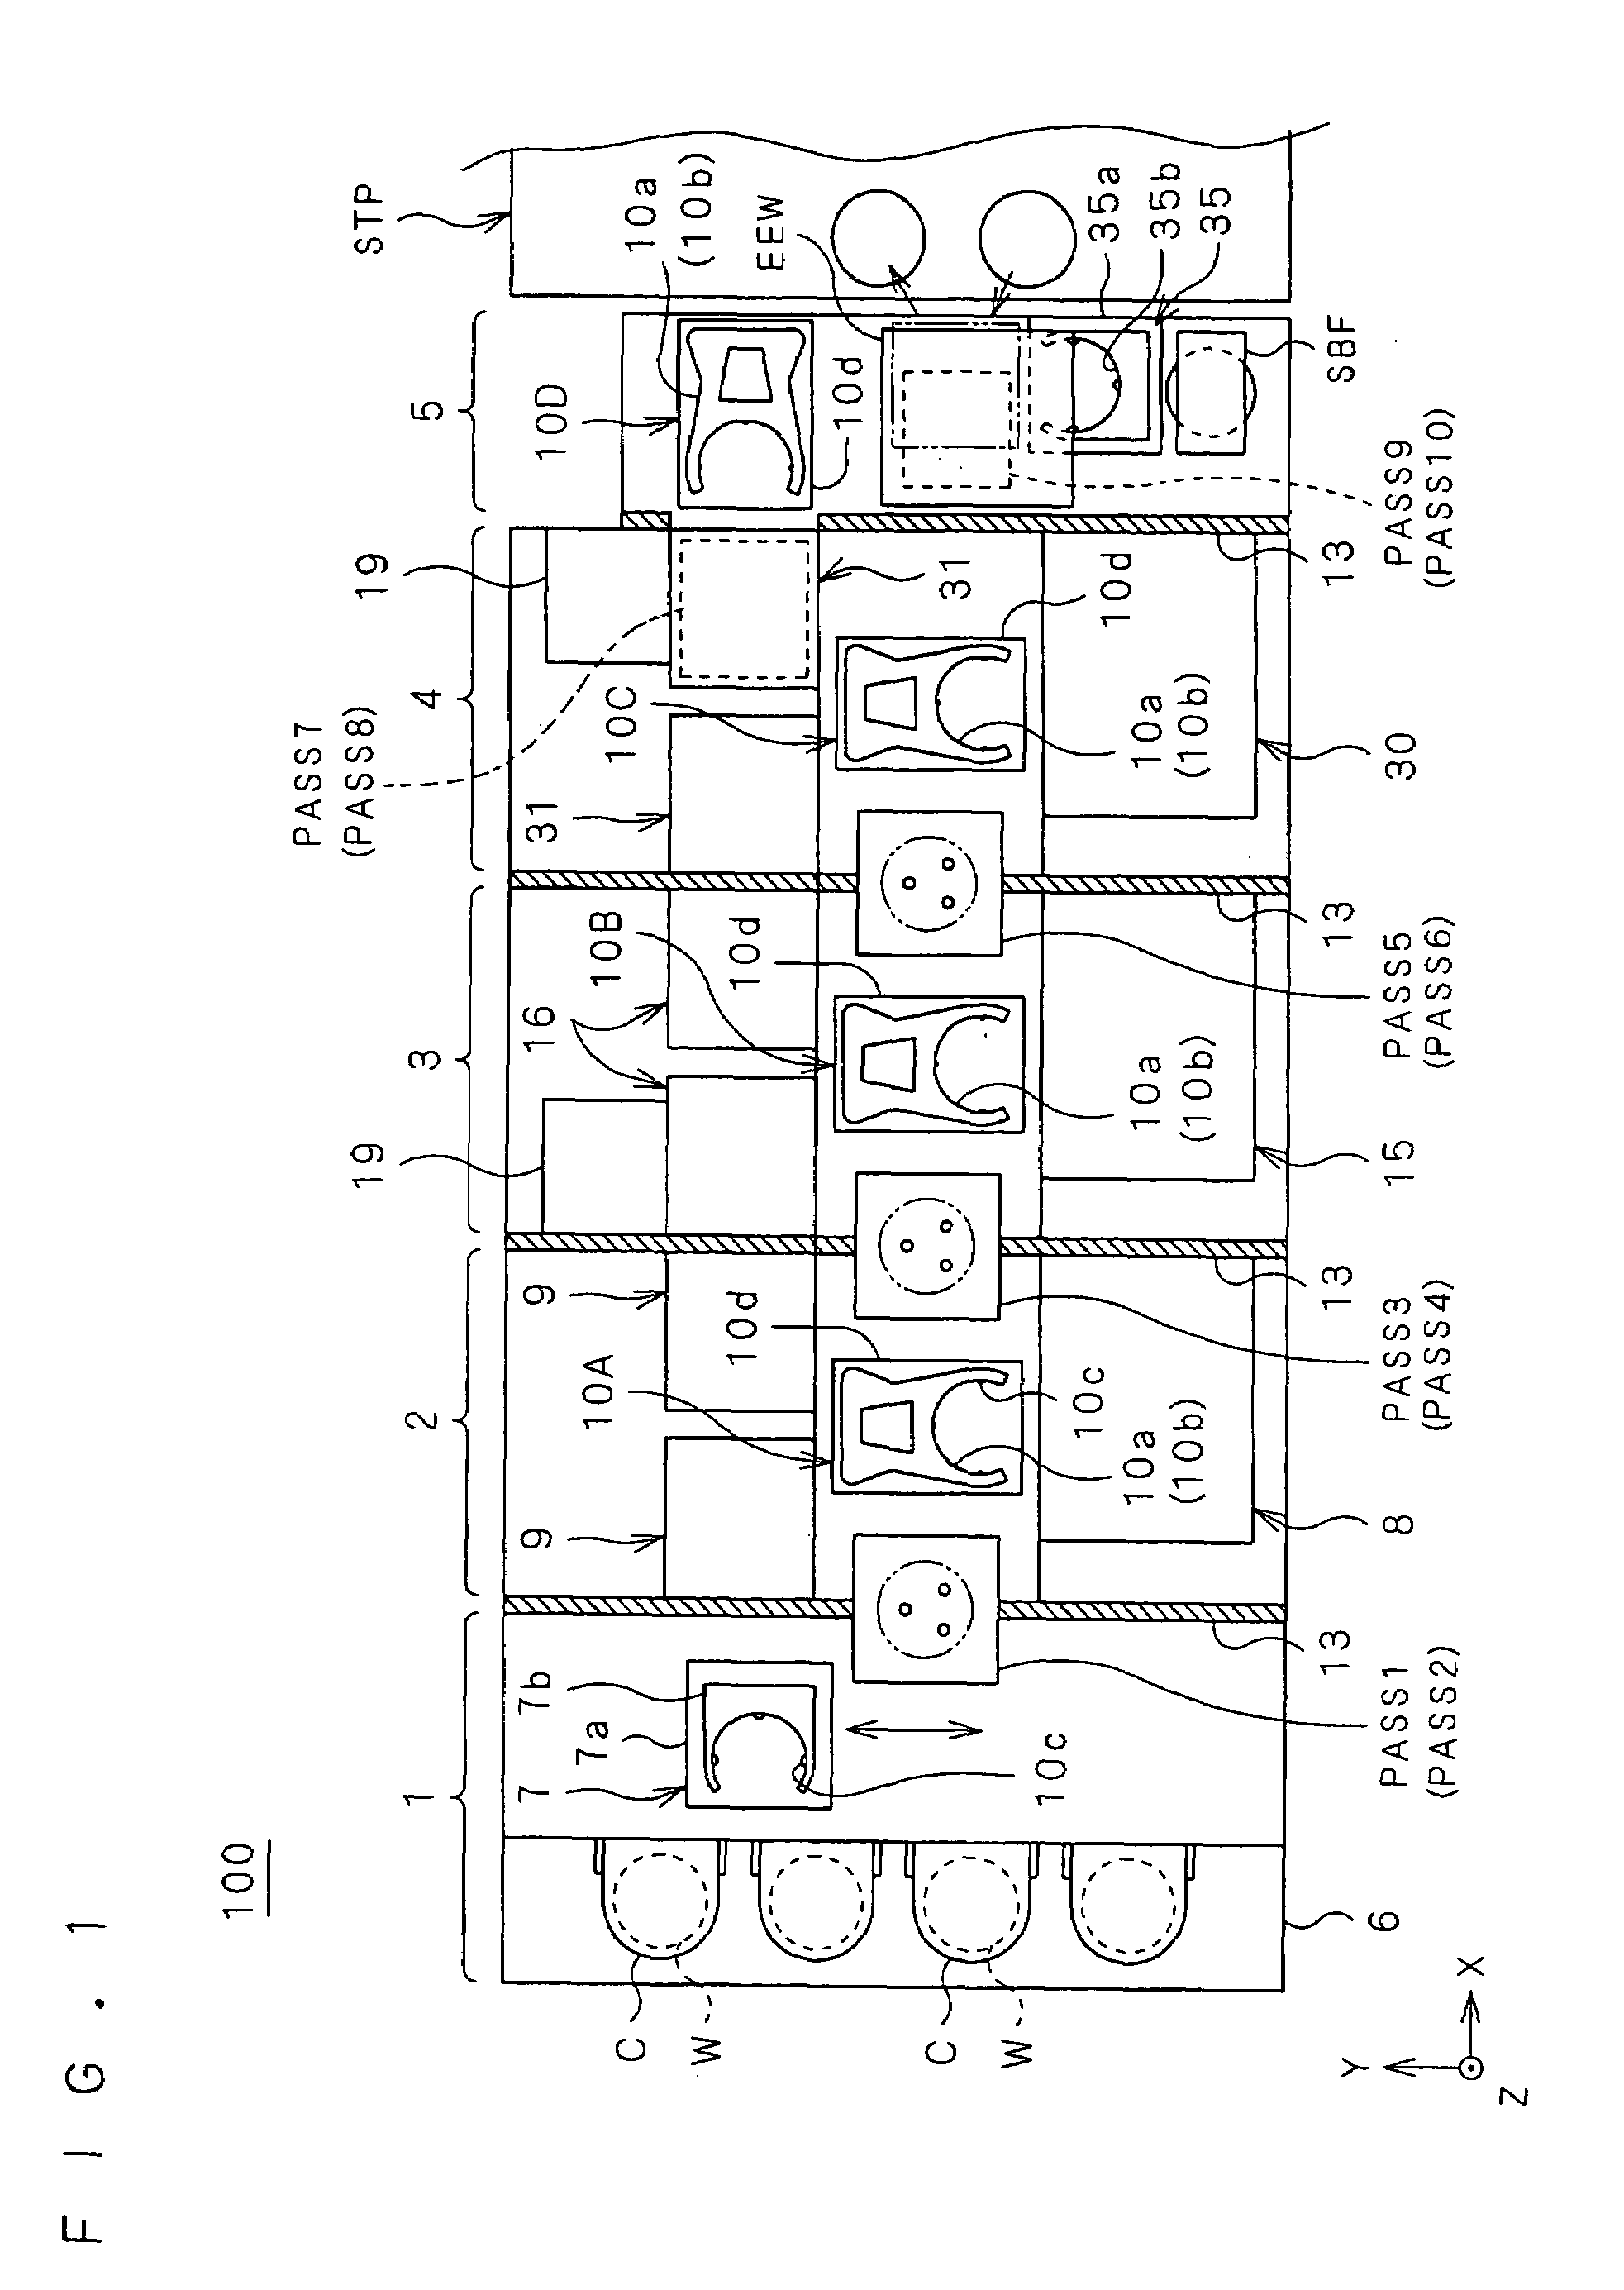 Method of transporting and processing substrates in substrate processing apparatus